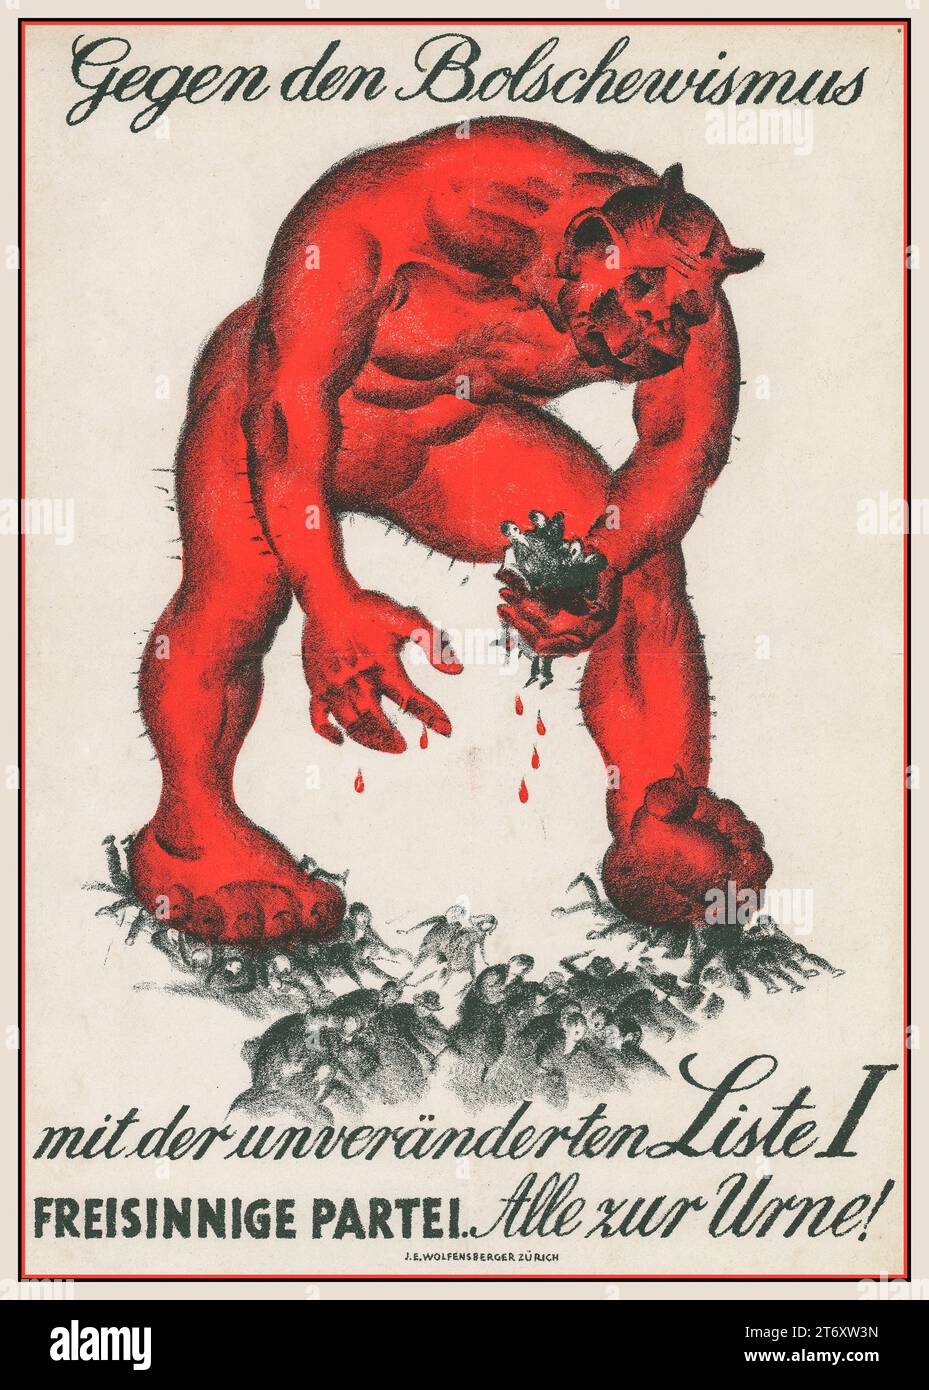 Propaganda poster 'AGAINST BOLSHEVISM' artist Burkhard Mangold, with red animal ogre capturing handfuls of people. LISTE 1  'Everybody to The Ballot Box  Election propaganda against Bolshevism. Against Bolshevism, 1919. by Burkhard Mangold. Stock Photo